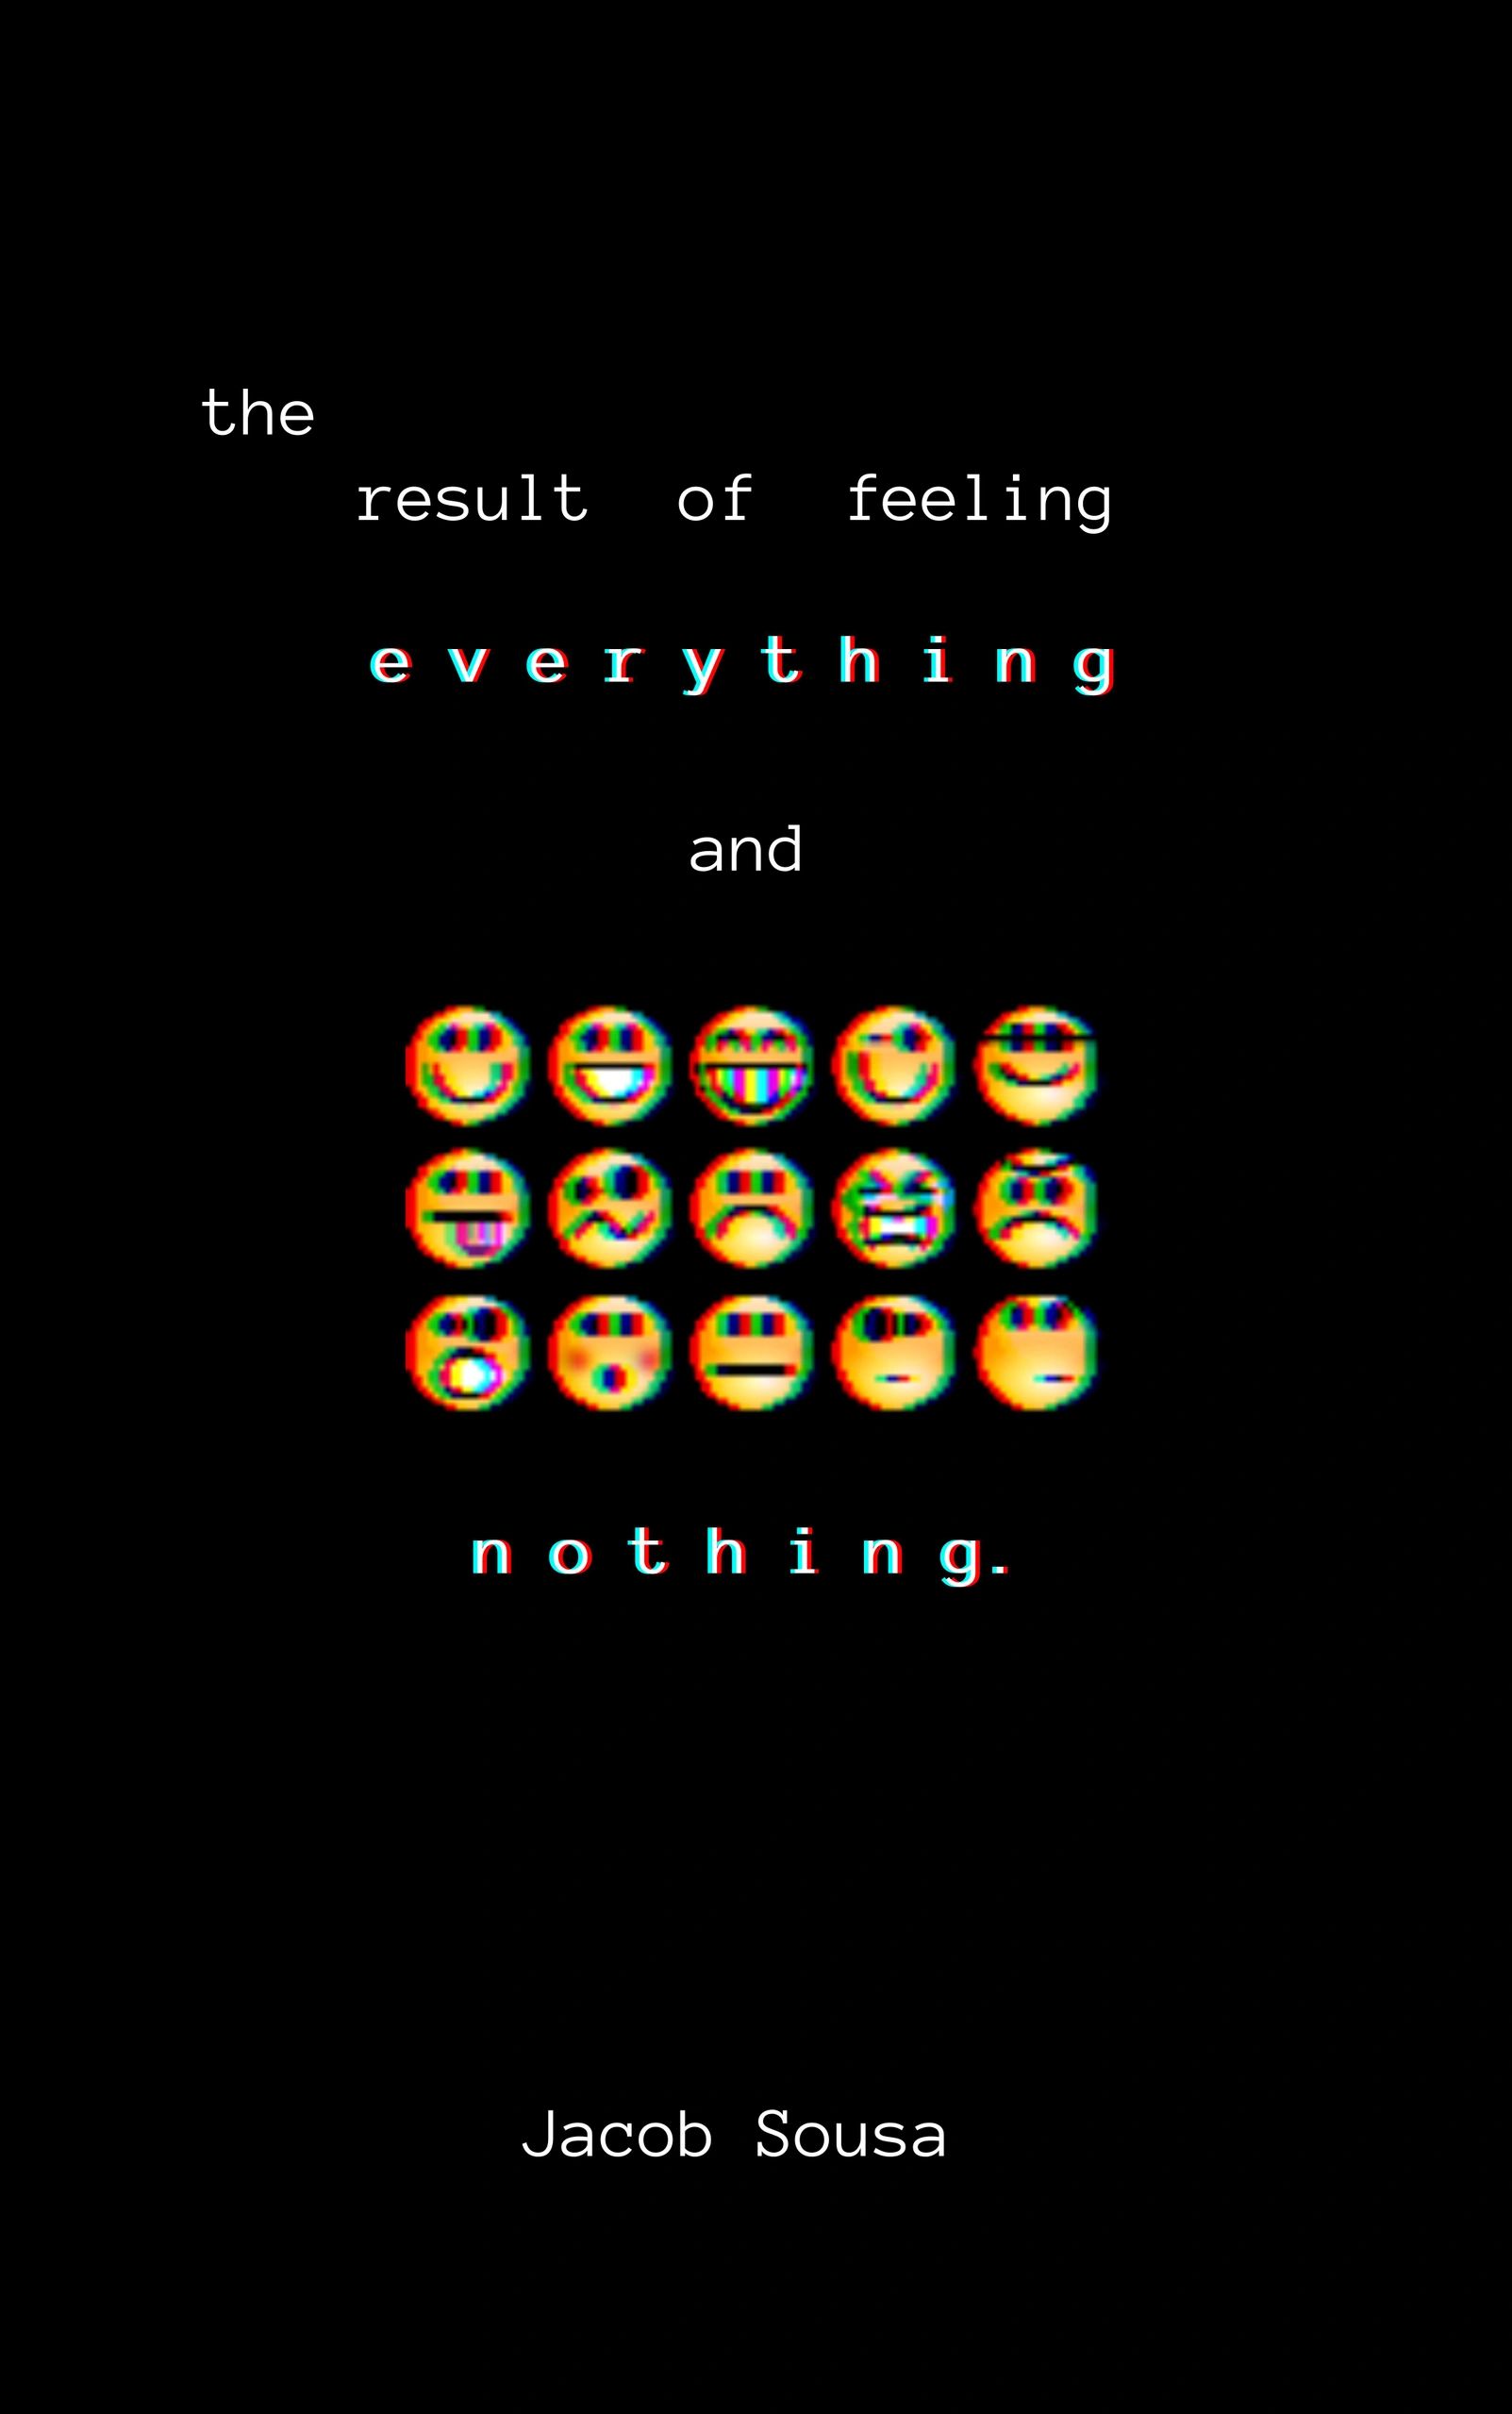 Cover to my first collection of poetry, "The Result of Feeling Everything and Nothing"